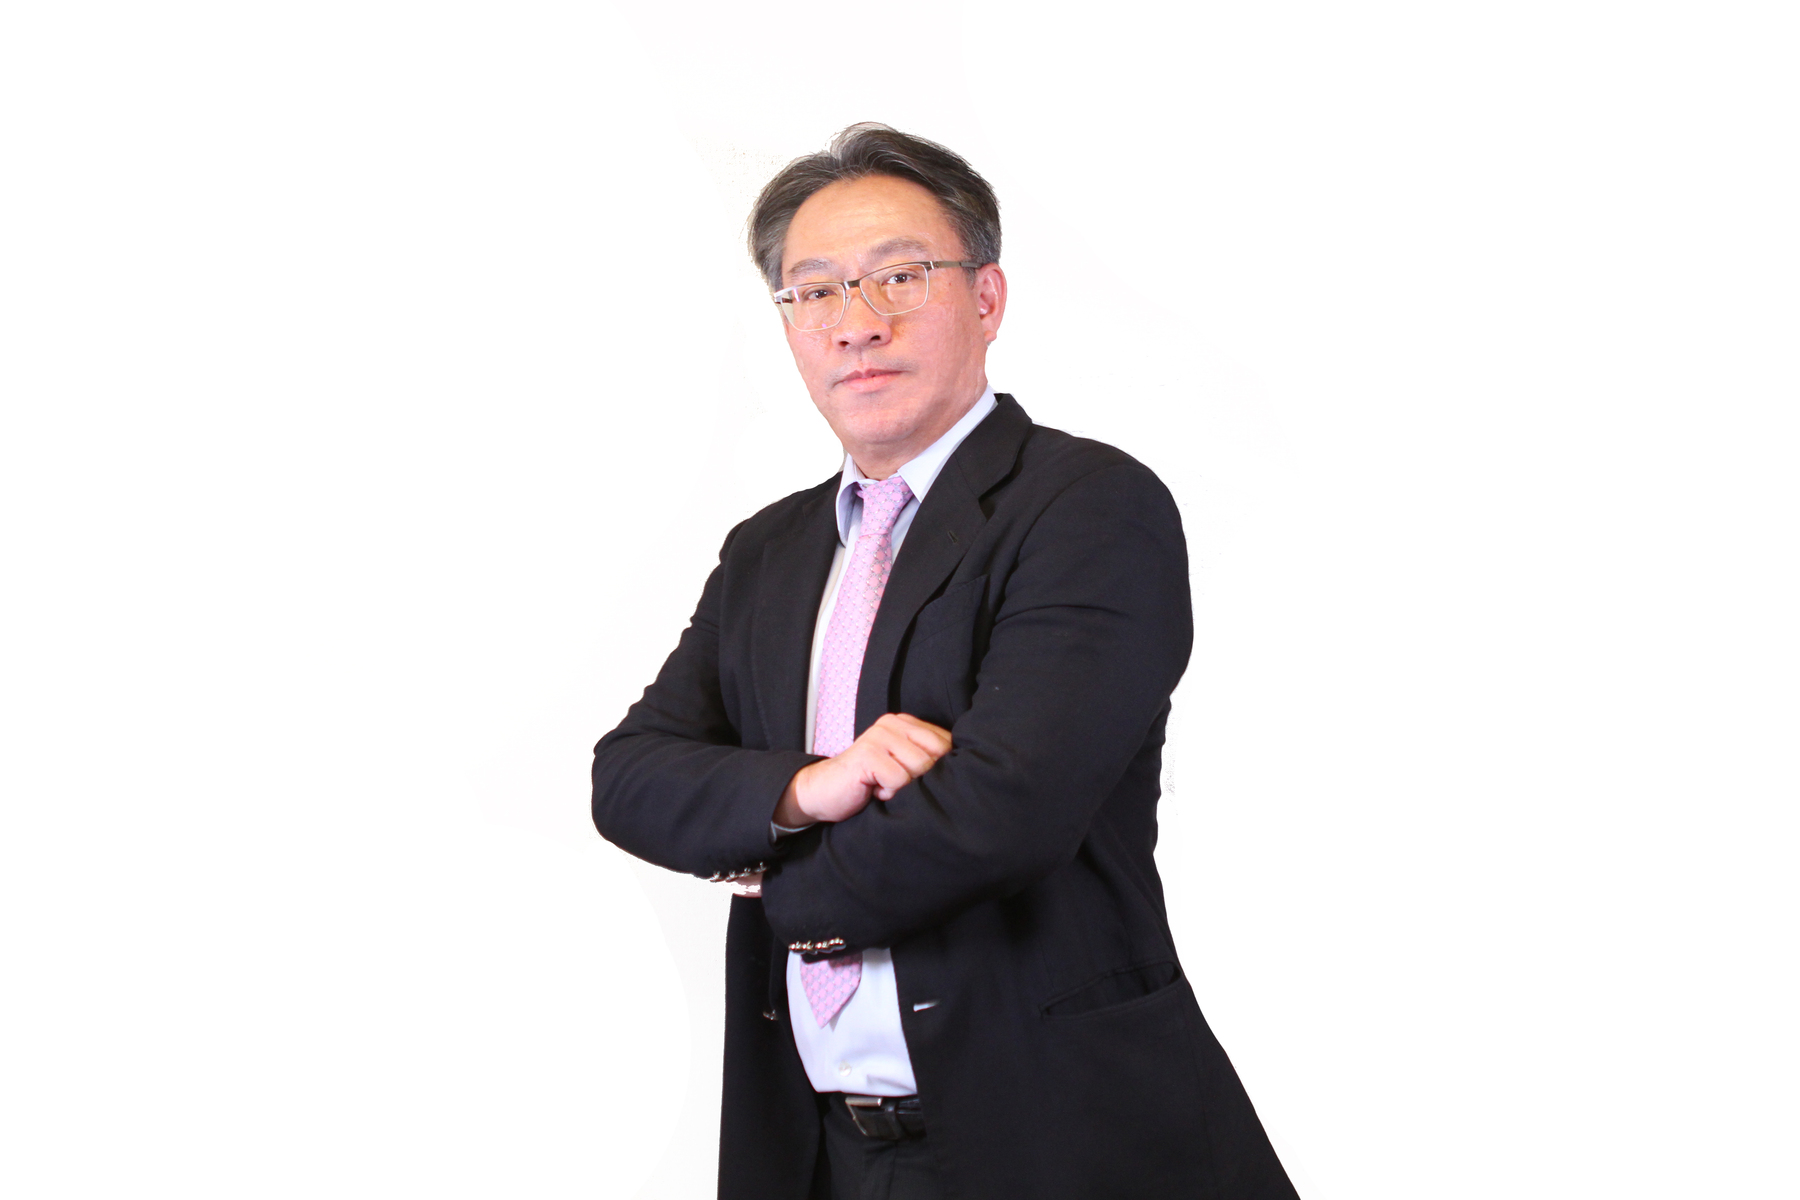 The outstanding alumni of the Business Elite category: Yu-Ming Chang, the Chairman of SUN YAD Construction Co., Ltd., an alumnus of the Department of Mechanical Engineering undergraduate programs in 1996 and the alumnus of the EMBA in 2012